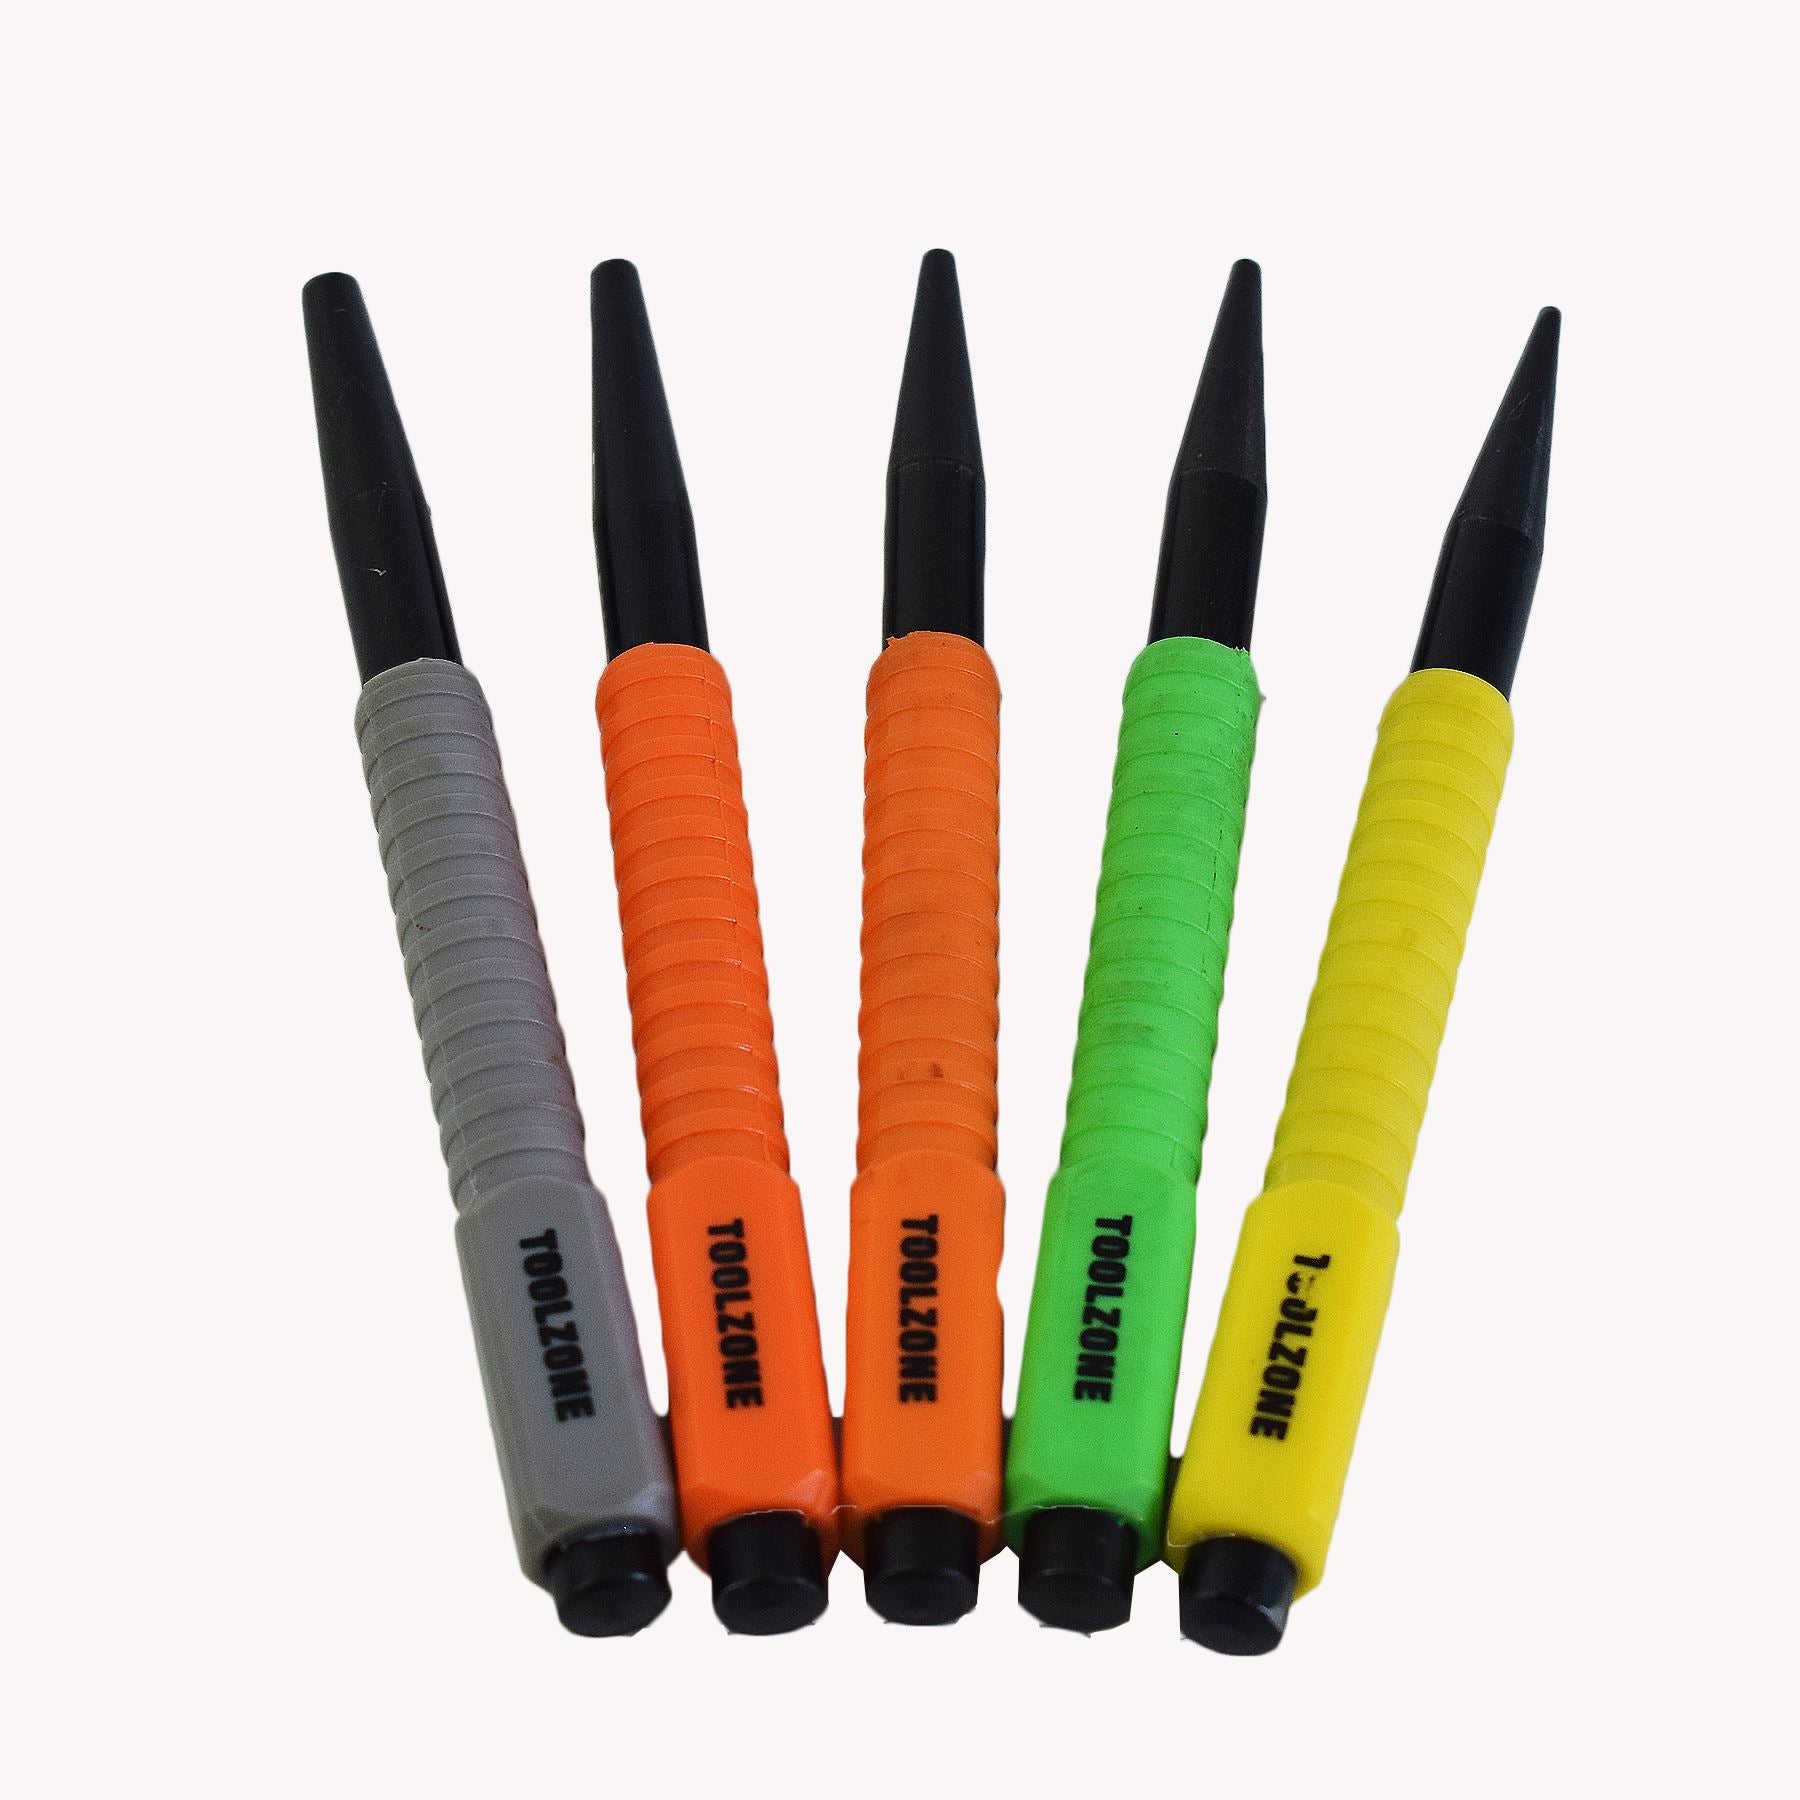 5pc Nail Punch Coloured Set 1.6 - 4.8mm Soft Grip Hollow End Steel TE976